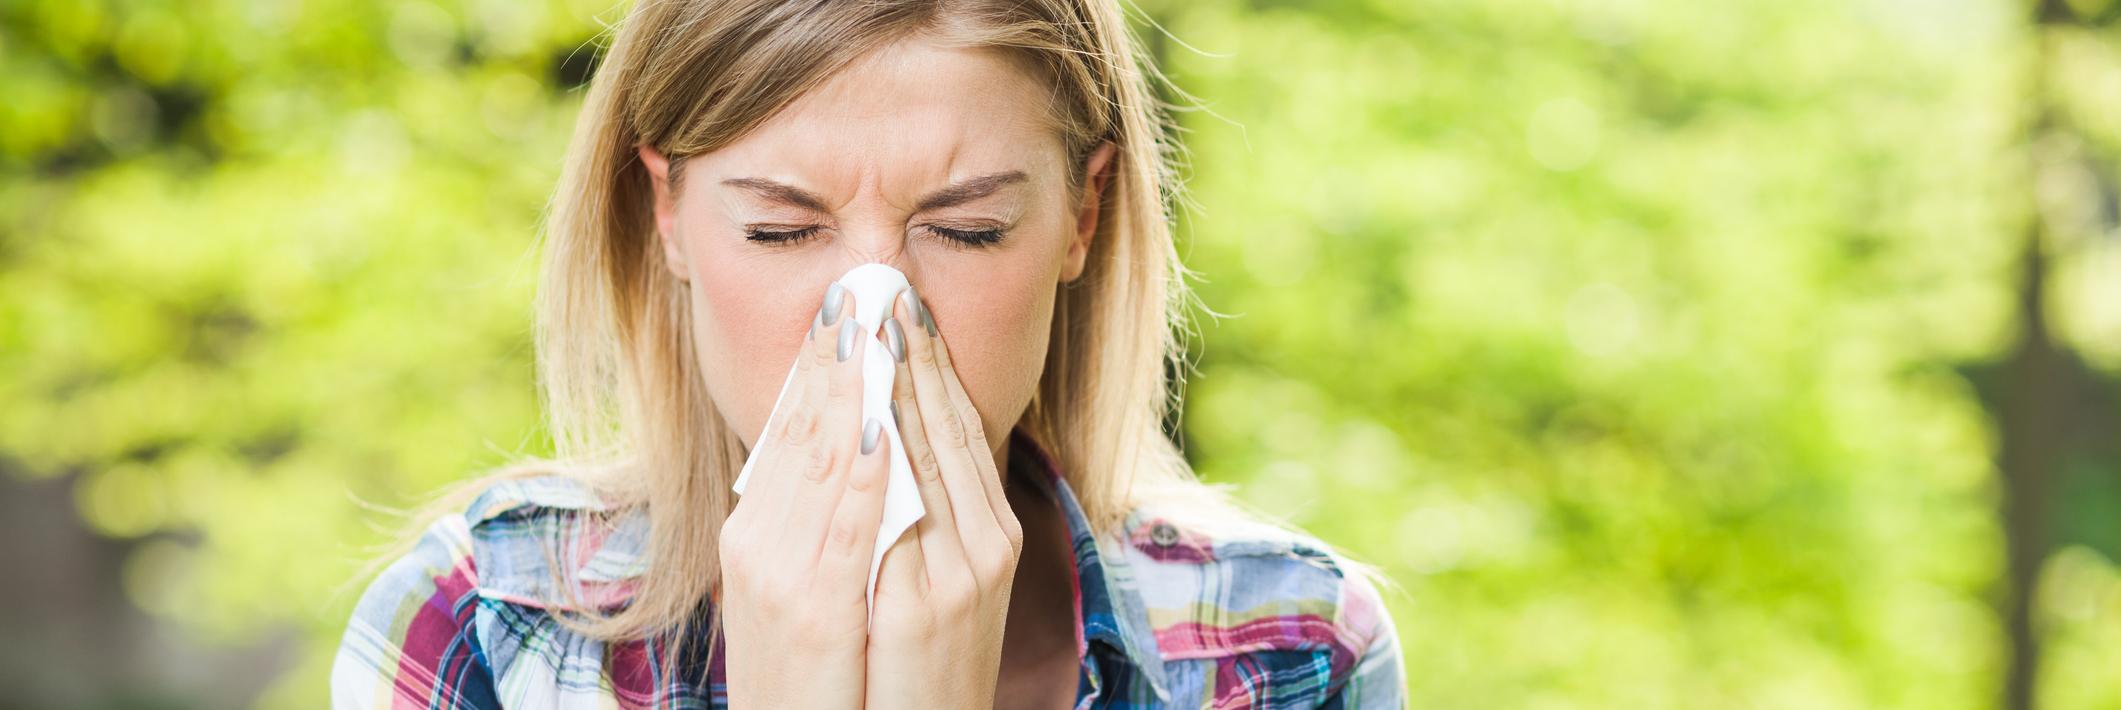 Summer and Those Dreaded Hay Fever Symptoms 